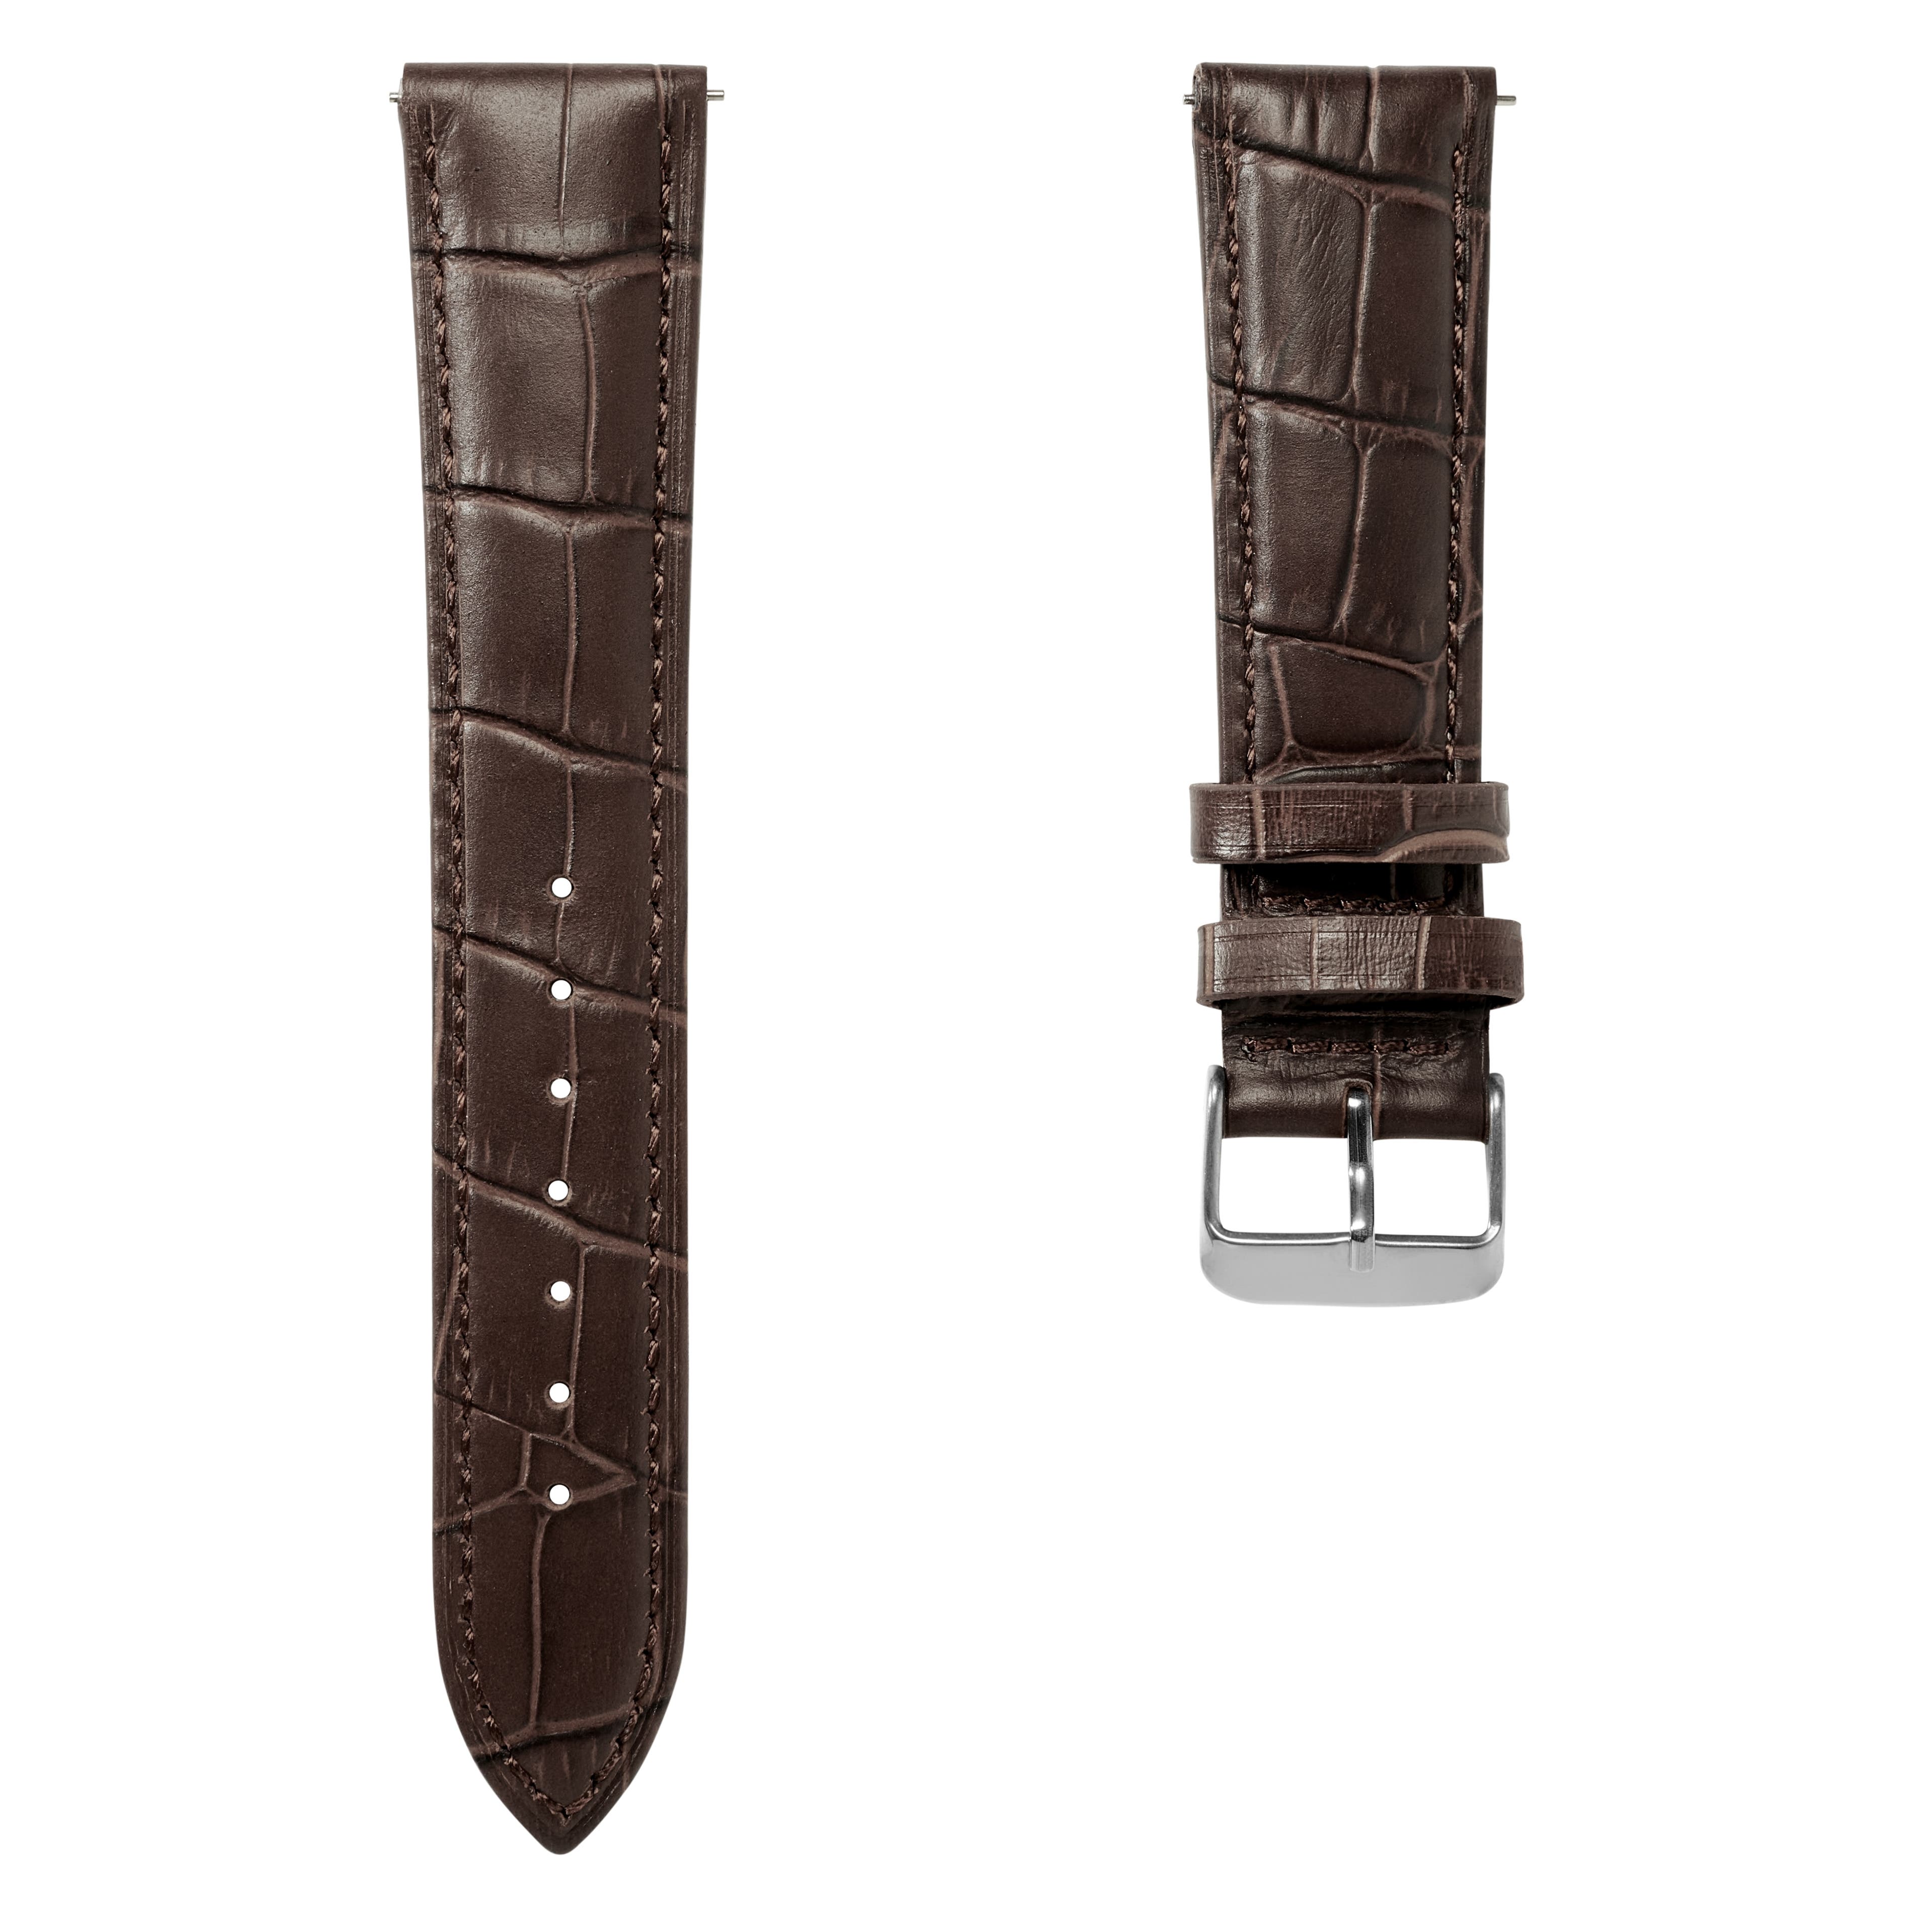 4/5" (20 mm) Crocodile-Embossed Dark-Brown Leather Watch Strap with Silver-Tone Buckle – Quick Release